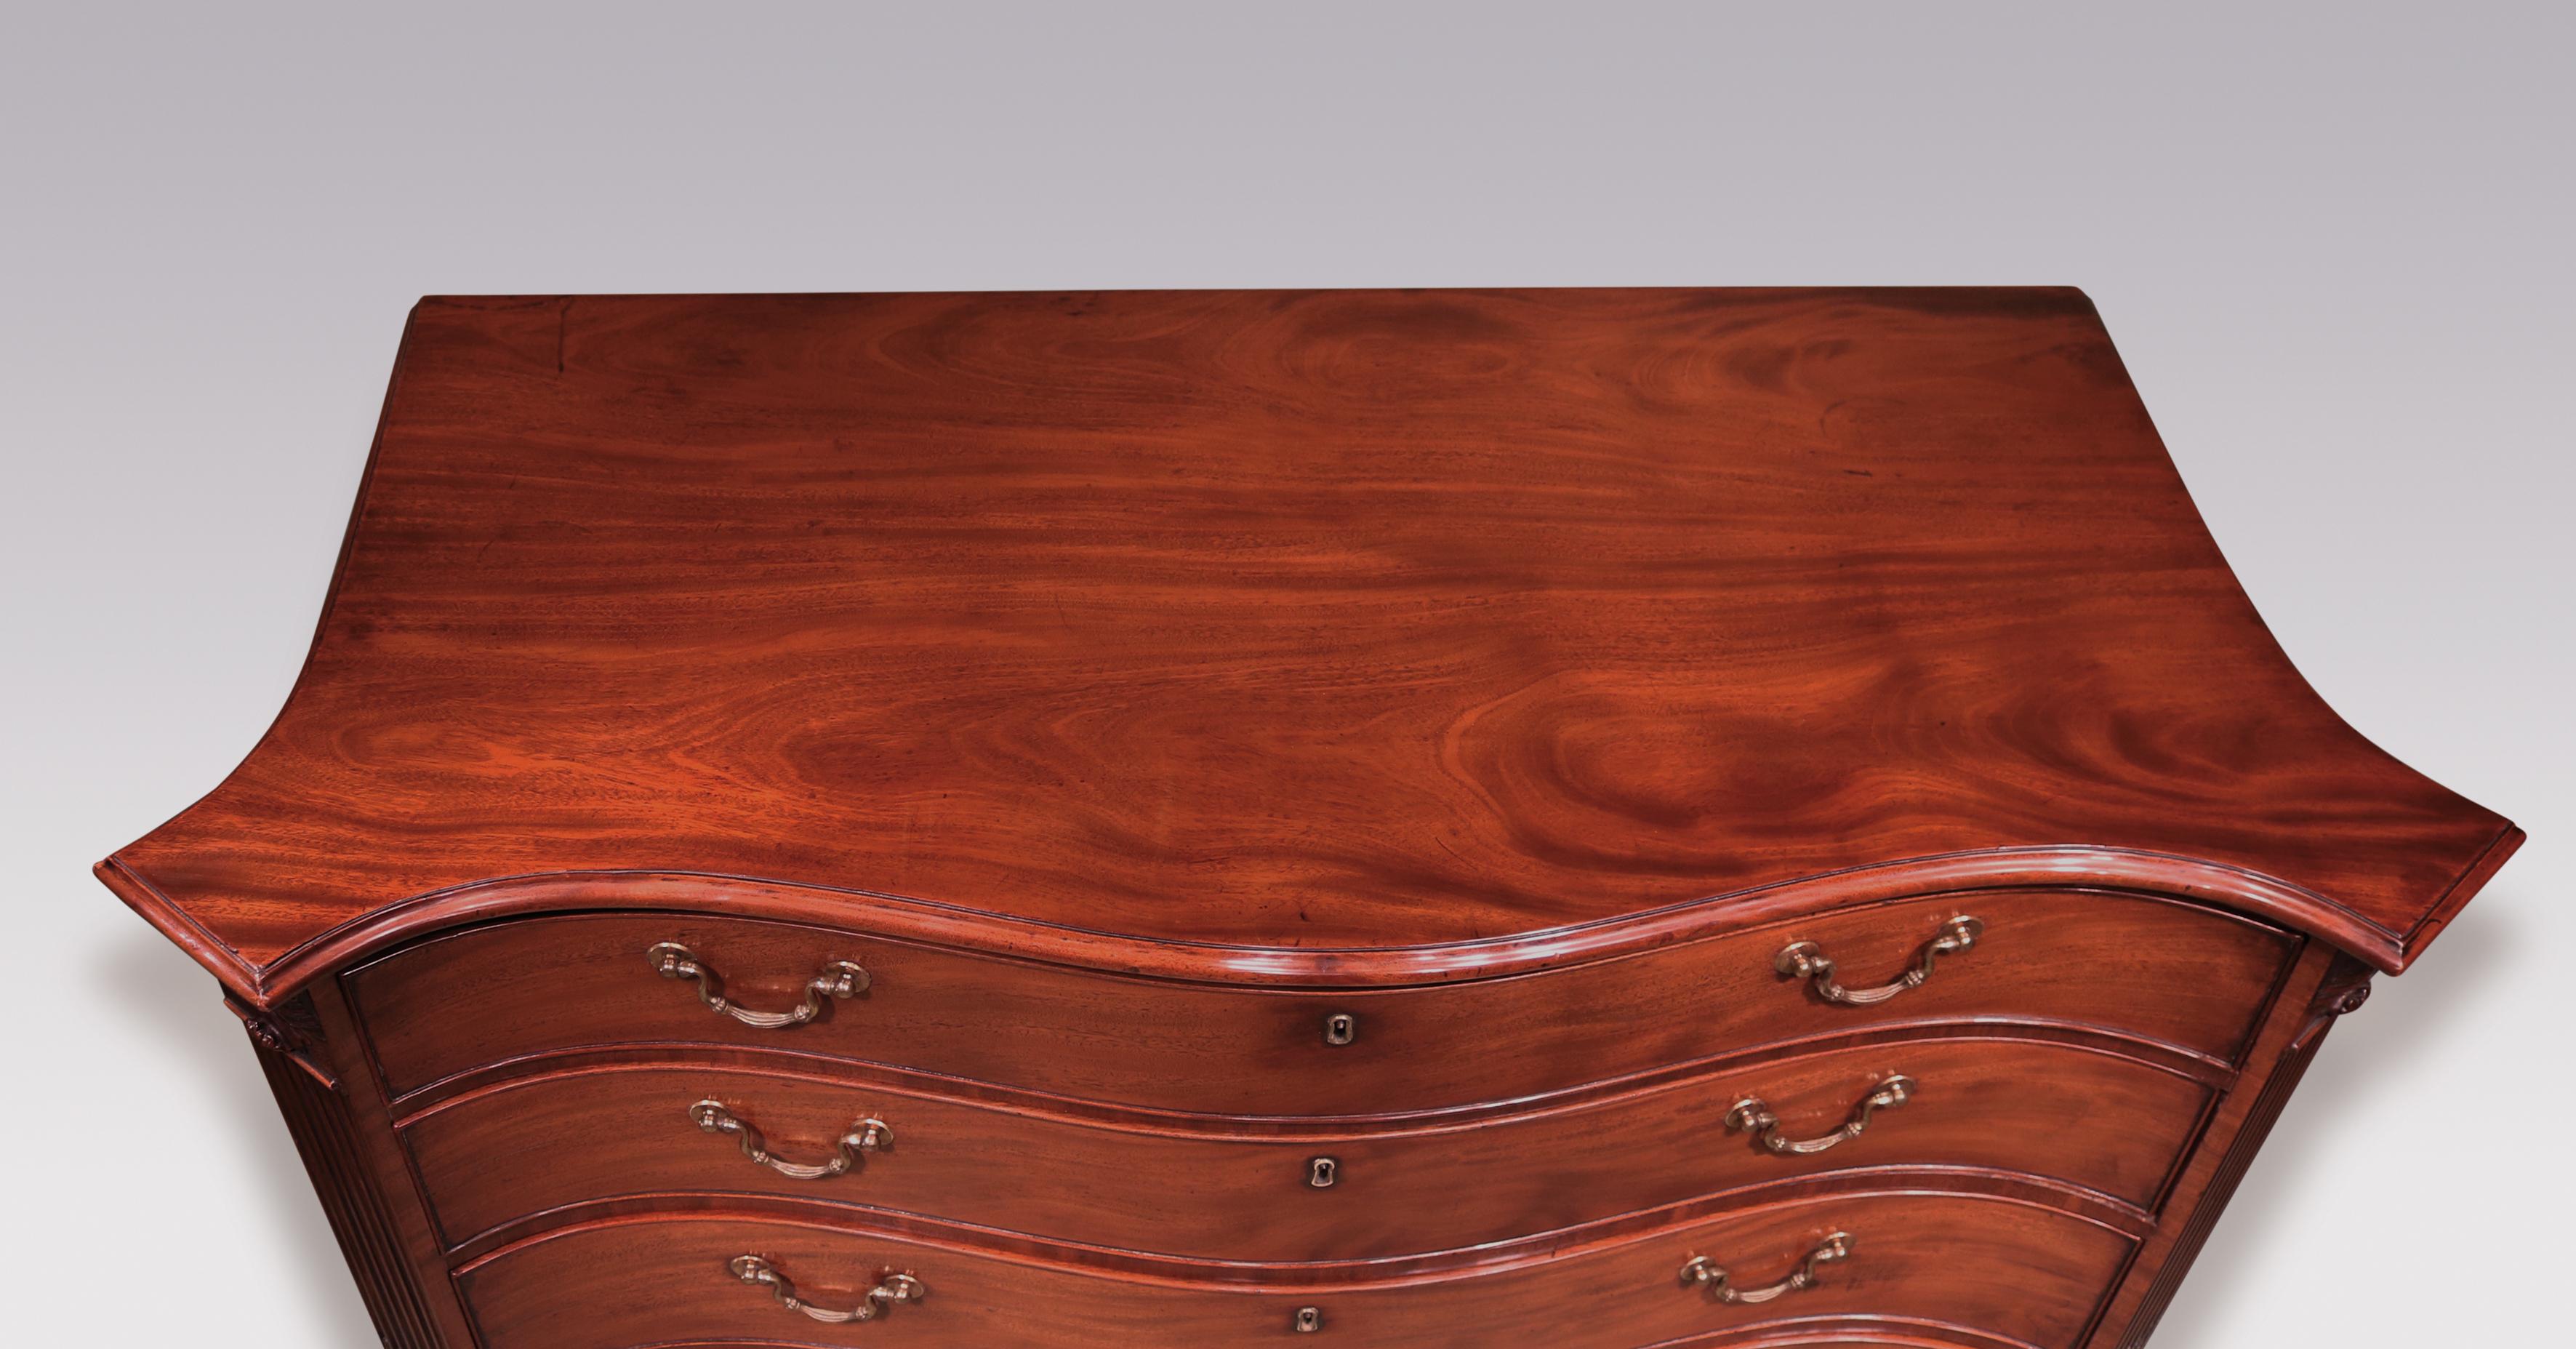 An impressive mid-18th century Chippendale period figured mahogany serpentine commode, having well-shaped moulded edged top above 4 cockbeaded graduated drawers flanked by canted corners with boldly carved acanthus leaves above fluted columns with